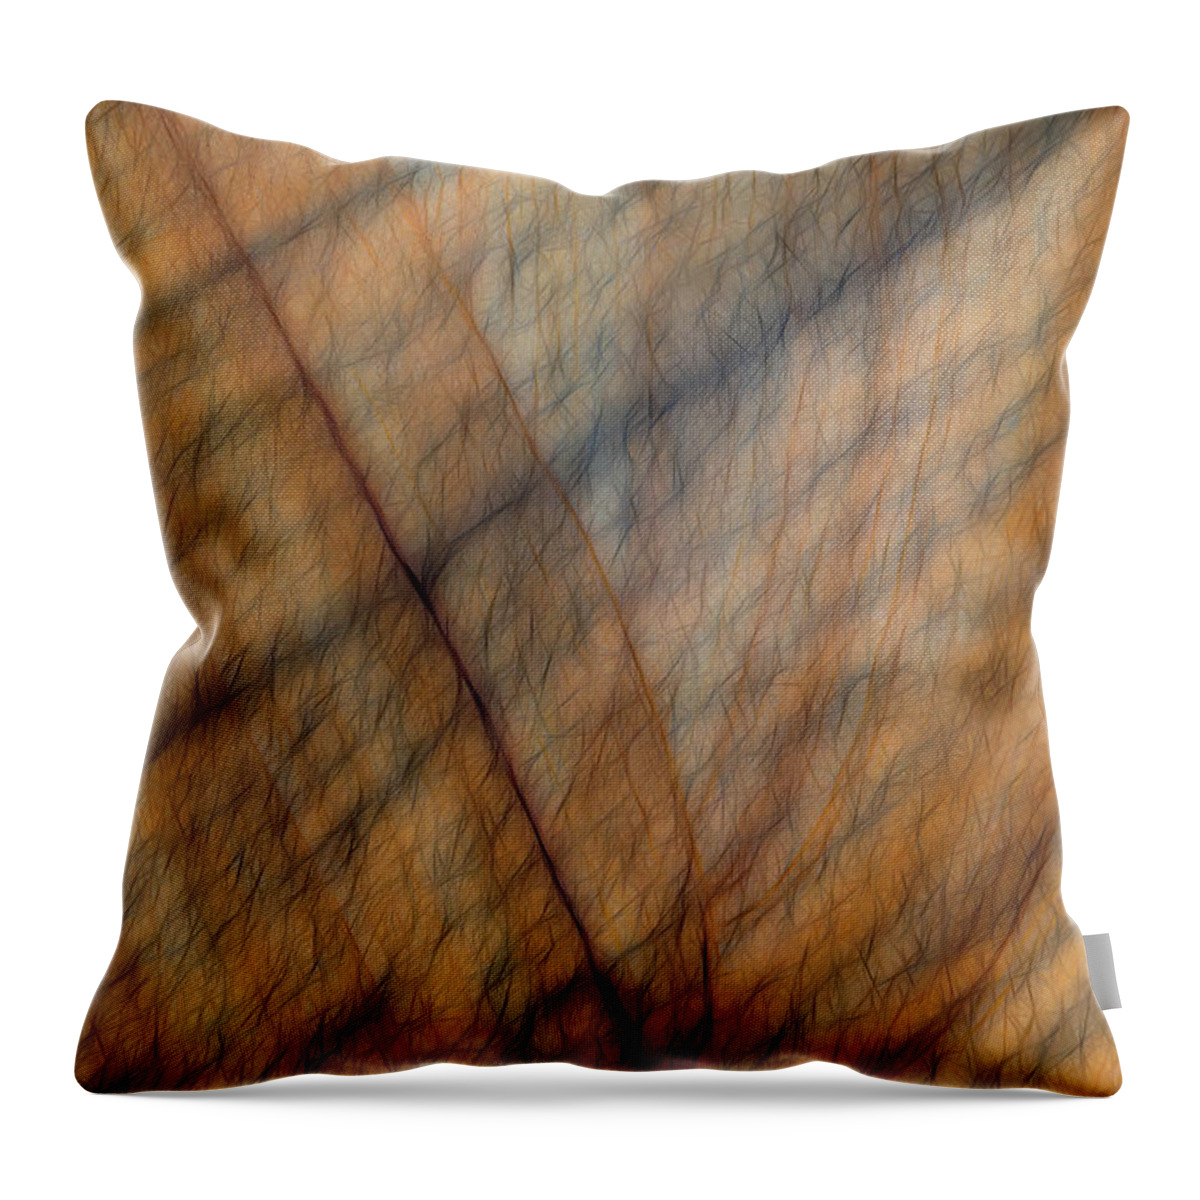 Rock Throw Pillow featuring the photograph Squiggles by Elaine Teague